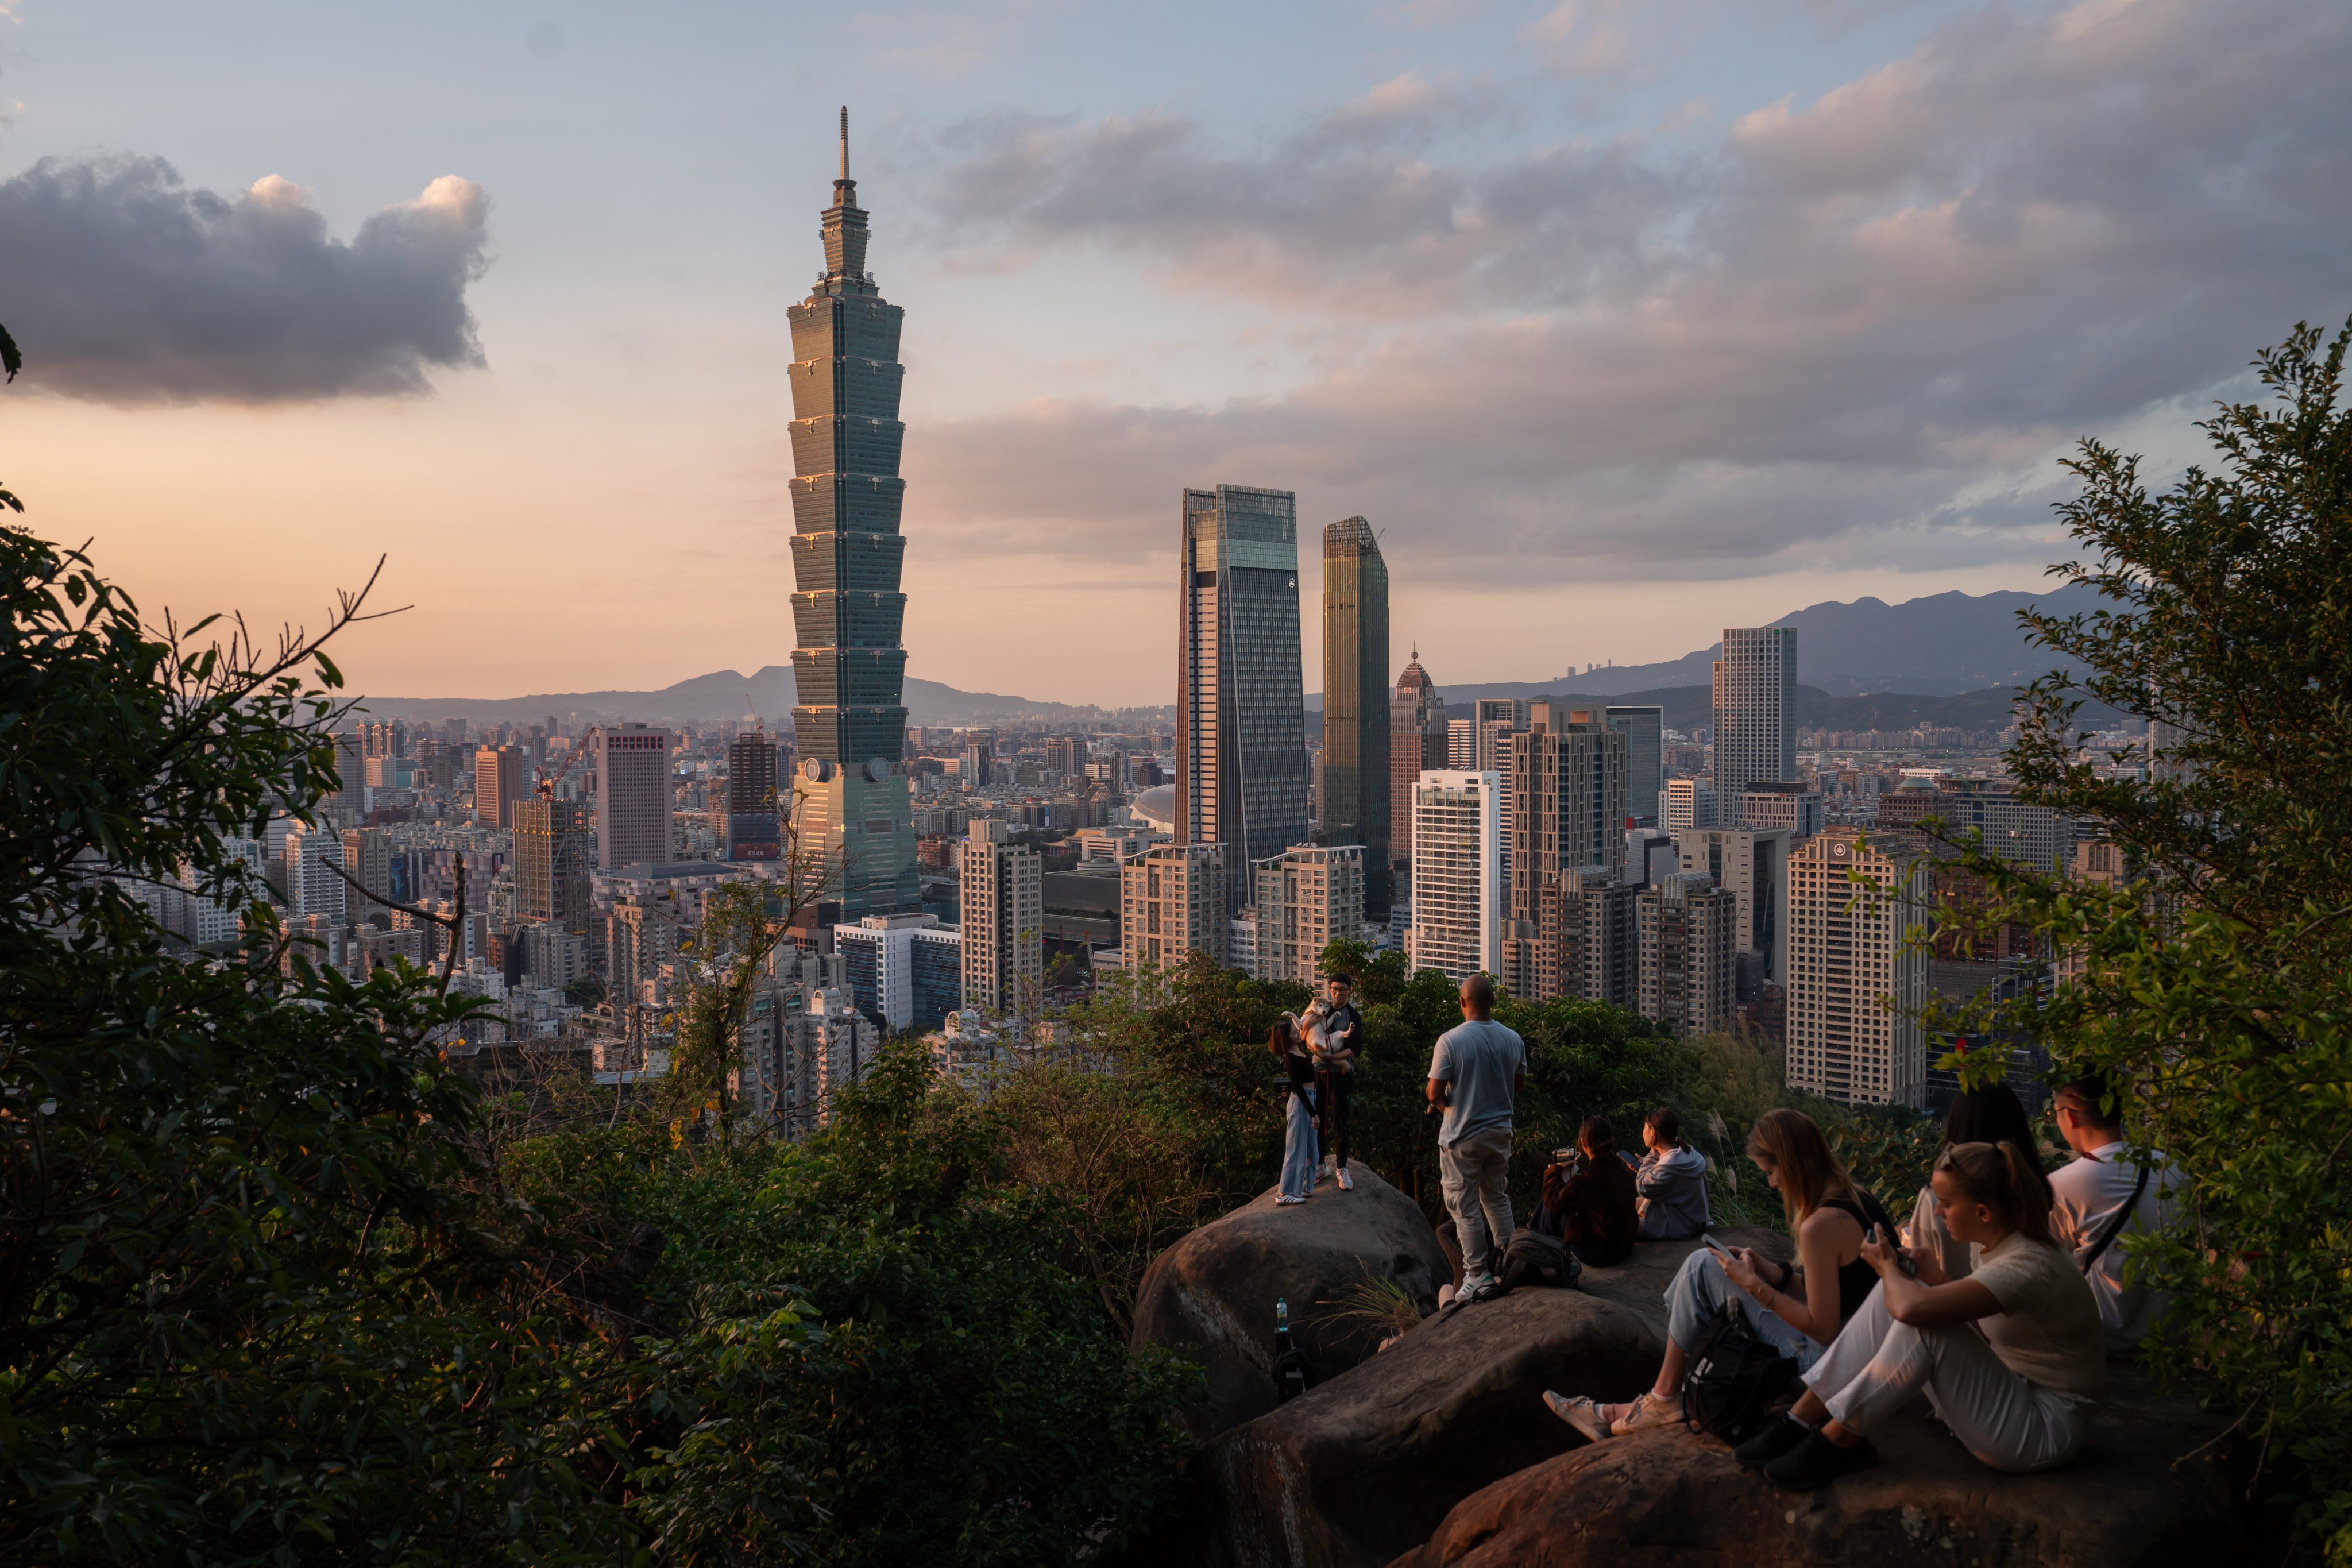 Hikers enjoy a sunset and city views at Xiangshan in Taipei. Photo: Elson Li